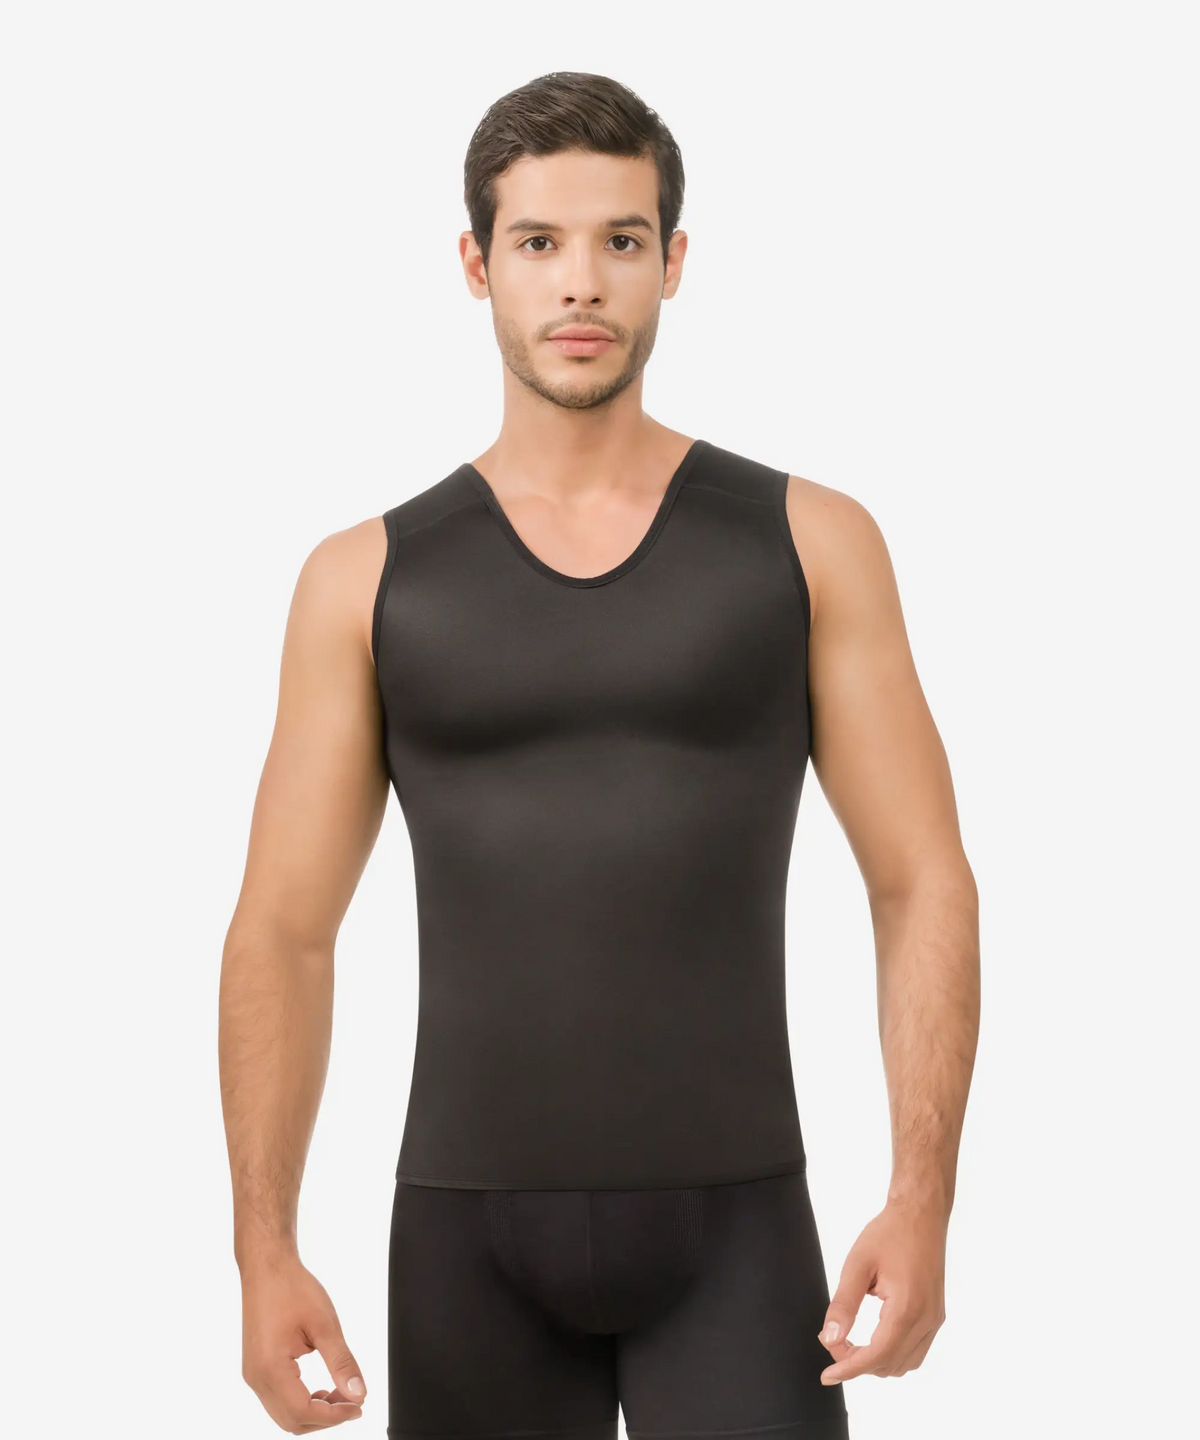 Men's High Performance Thermal Shirt - Style 8018 — CYSM Shapers